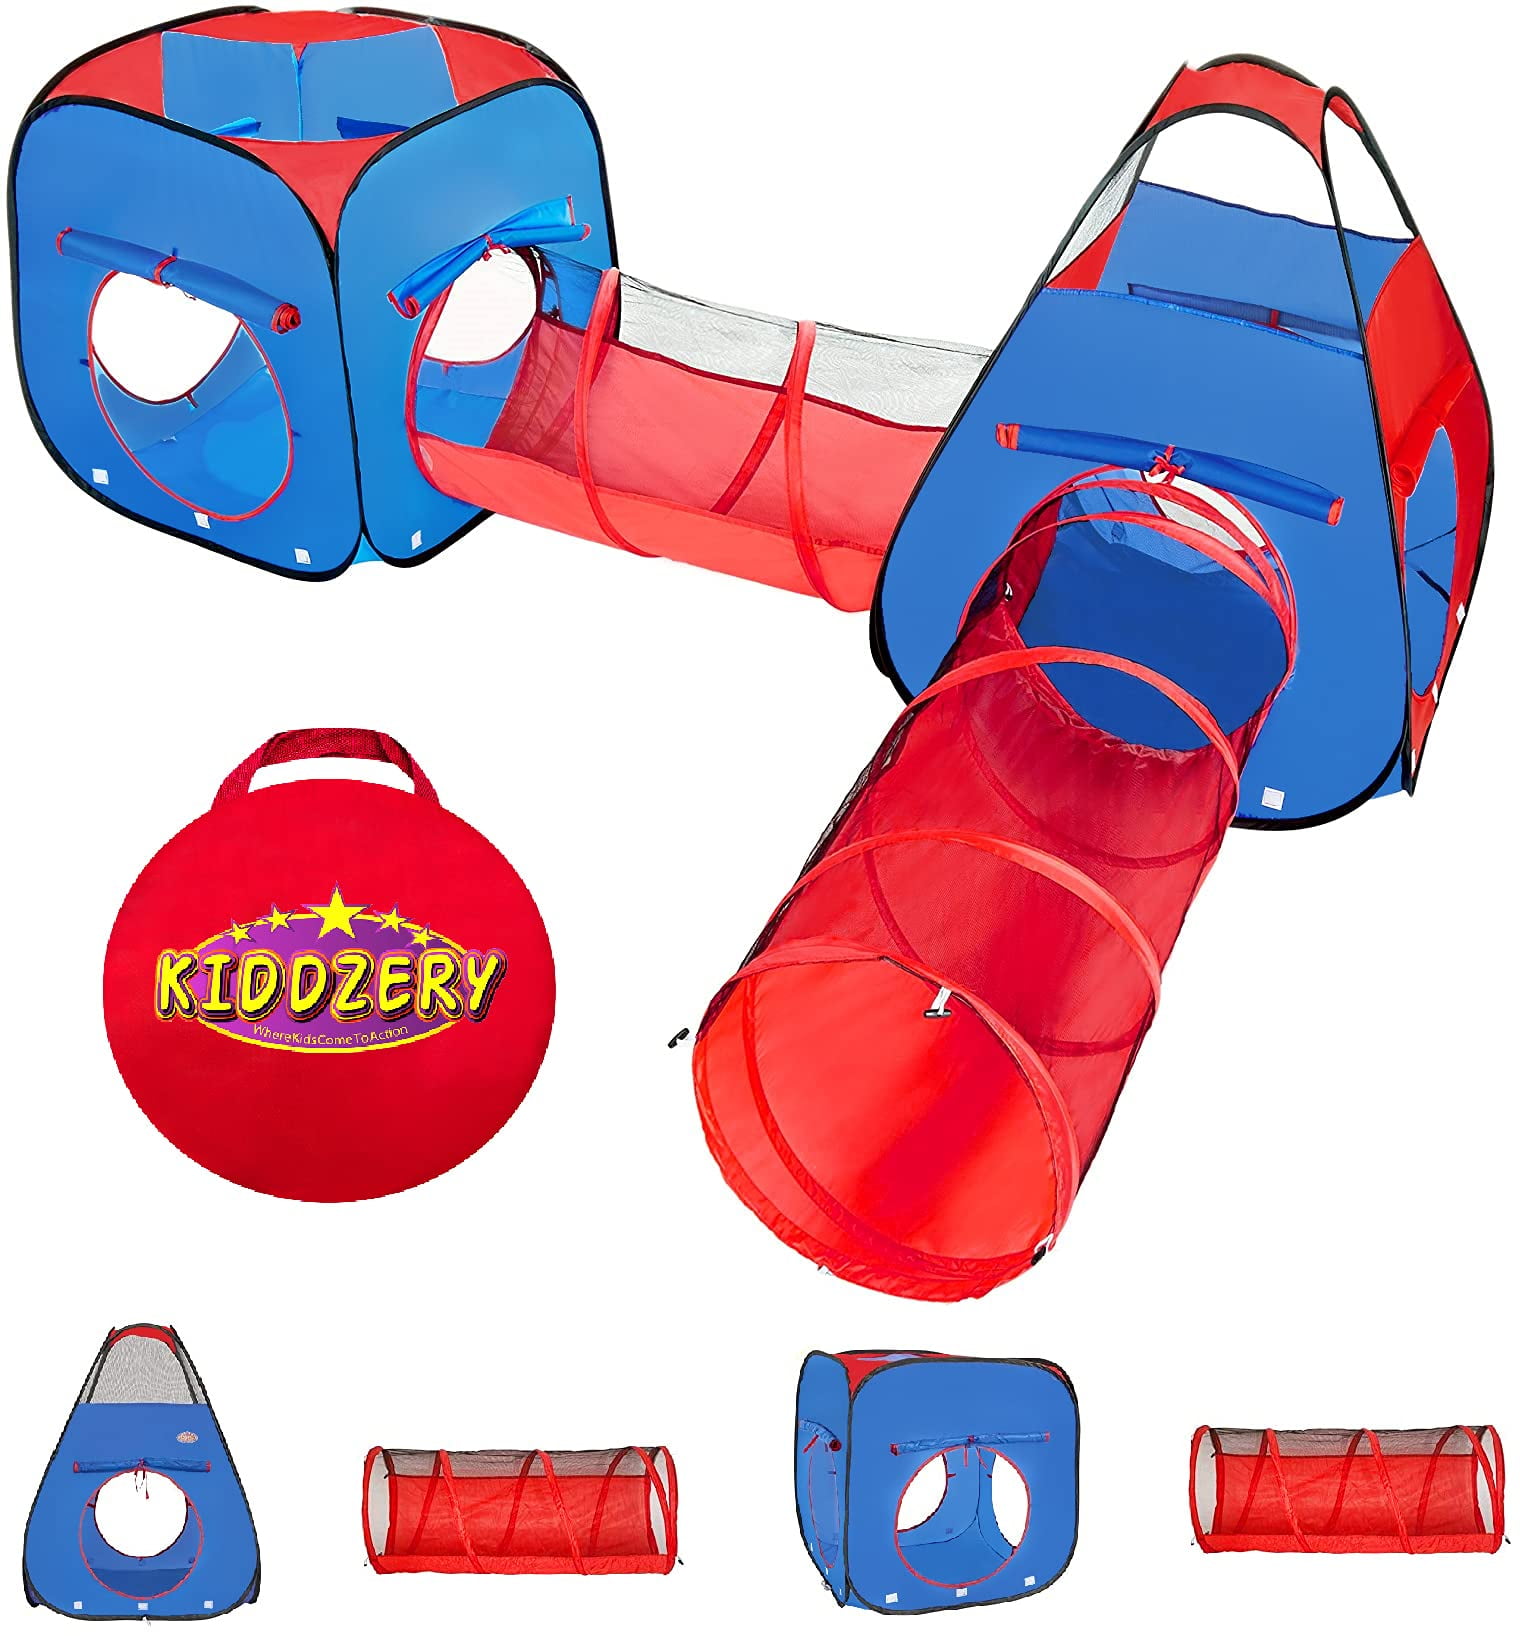 Kiddzery 4-Piece Kids Play Tent and Tunnels, Pop Up Ball Pit, 2 Tents + 2  Crawl Tunnels